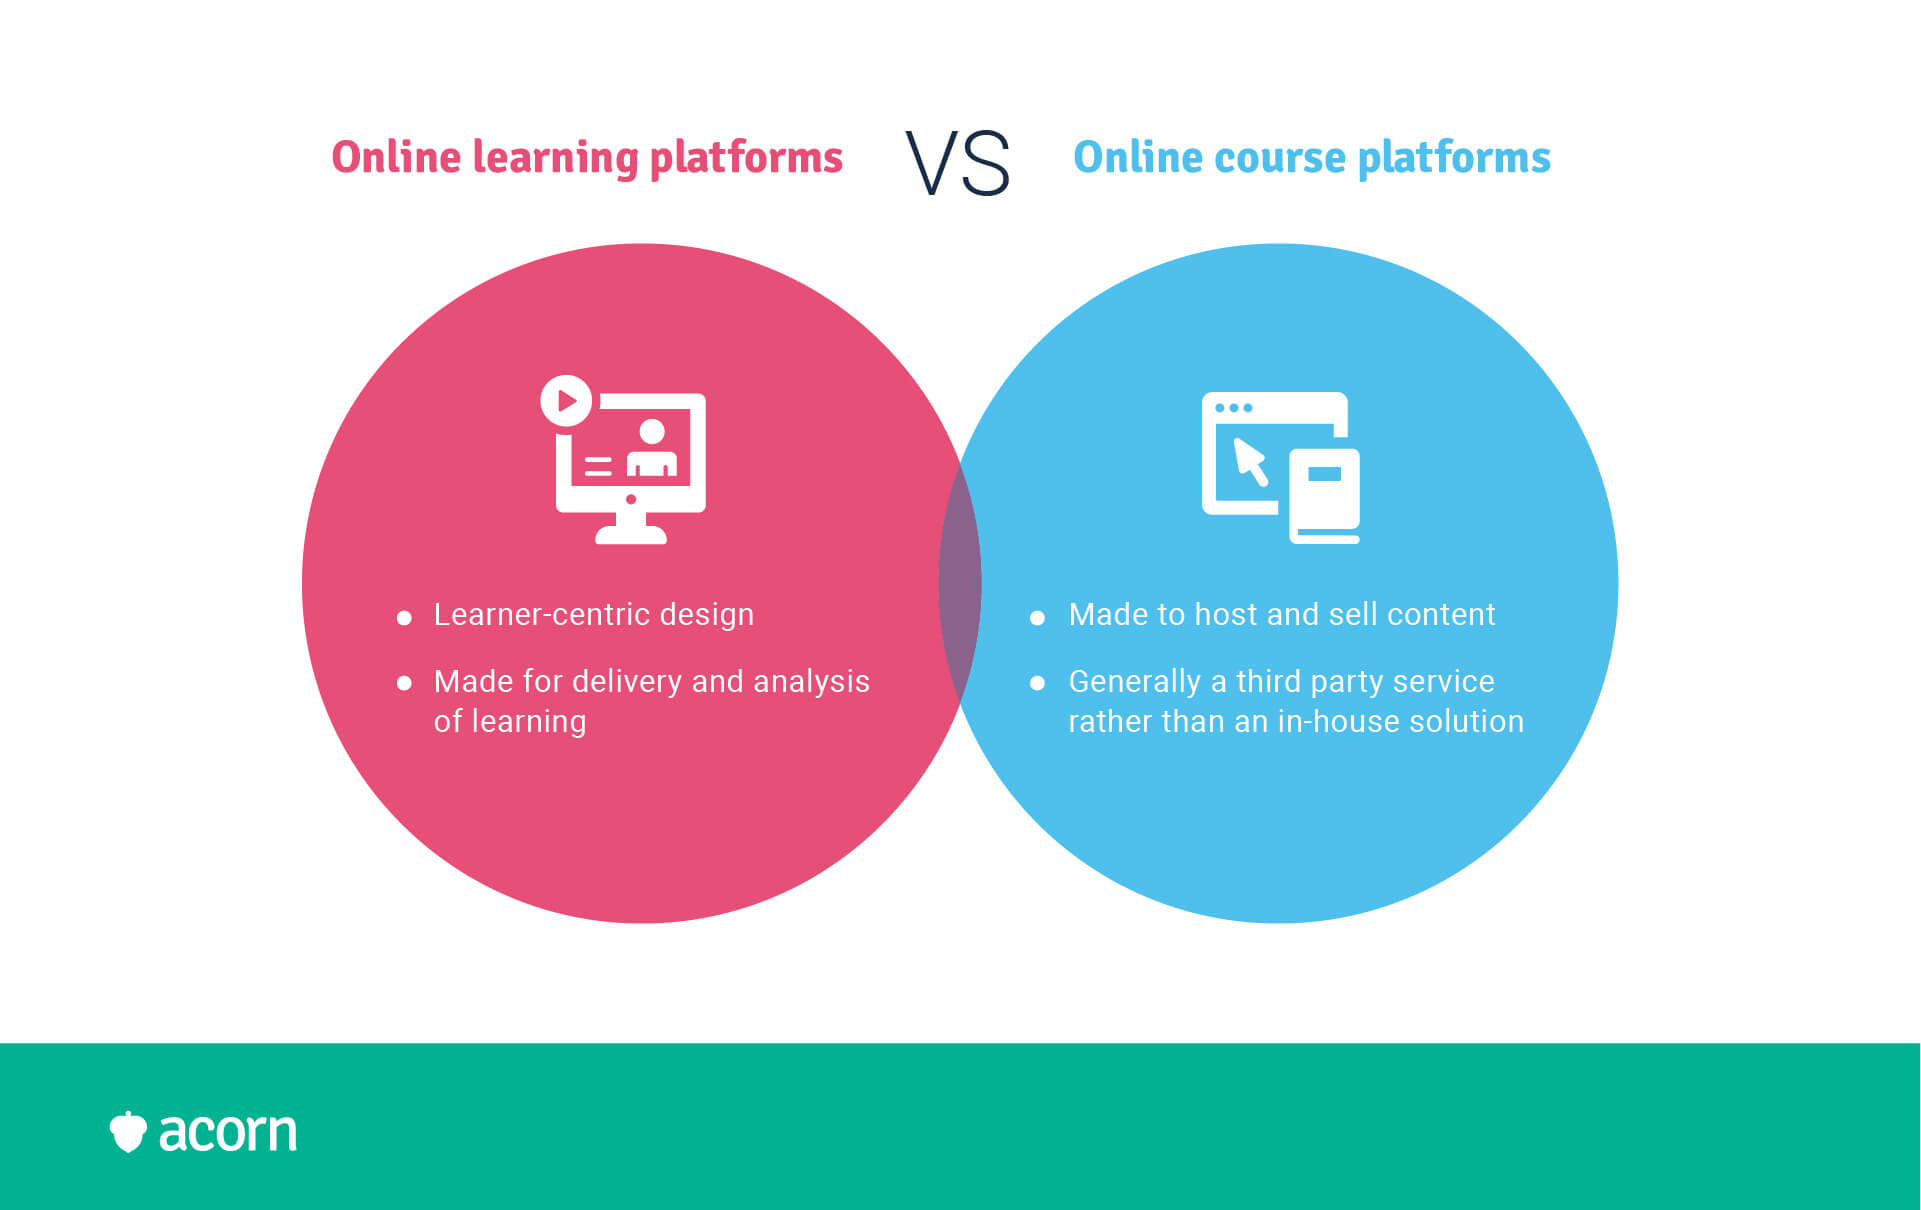 venn diagram of the main differences between online learning platforms vs online course platforms